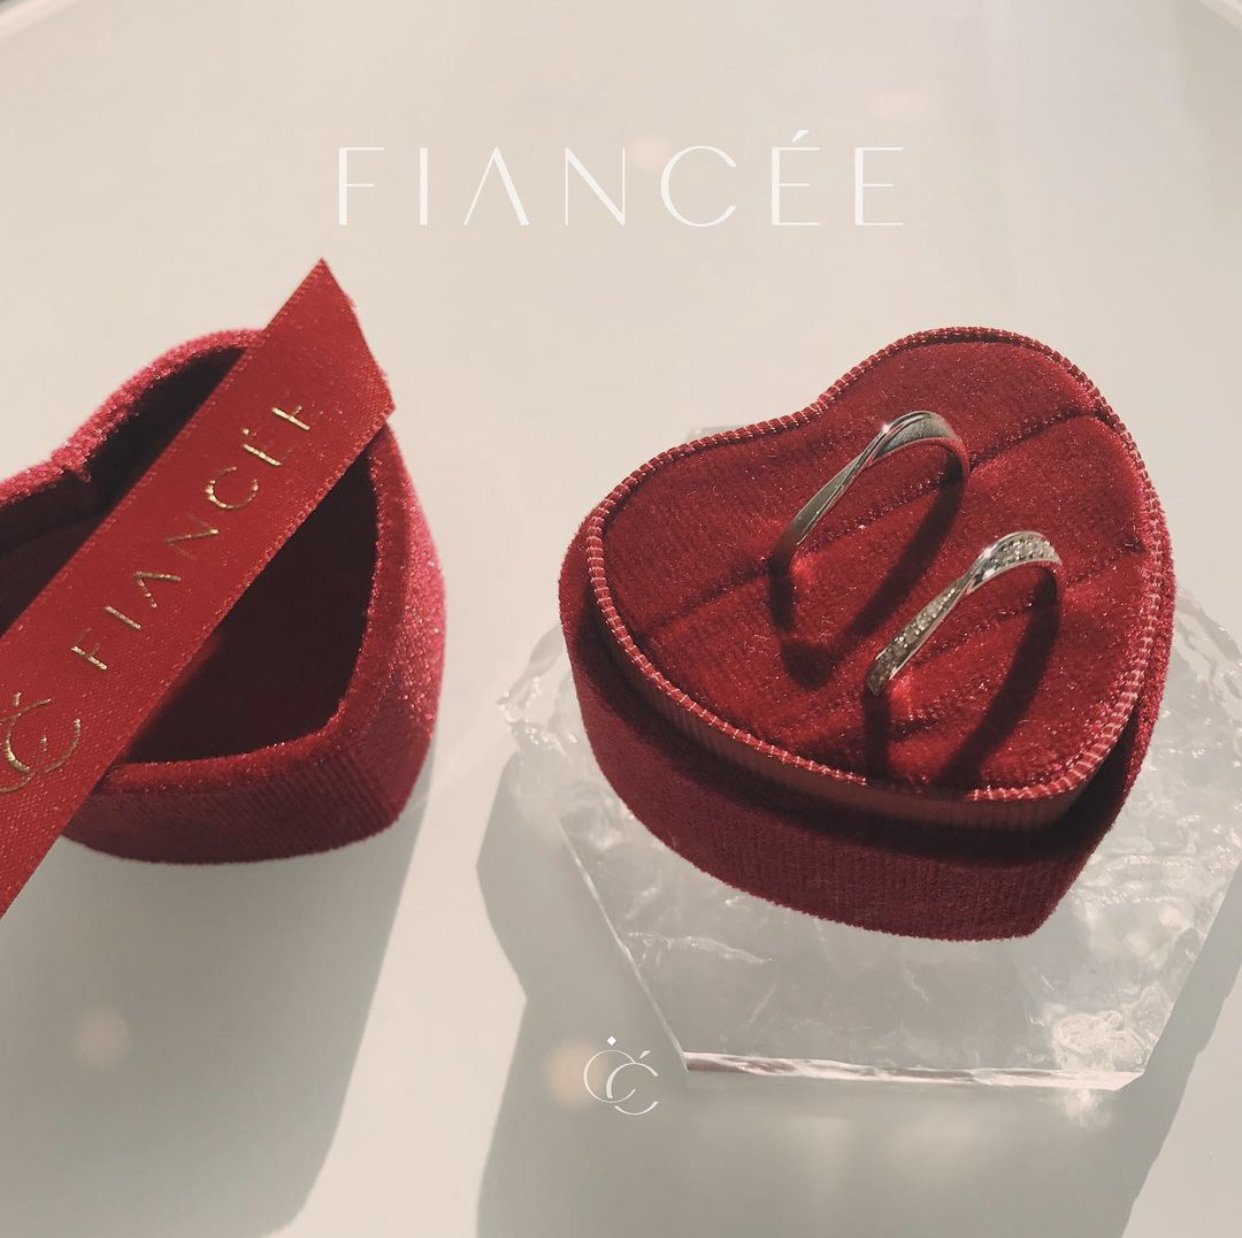 FIANCÉE-Forever Couple Ring